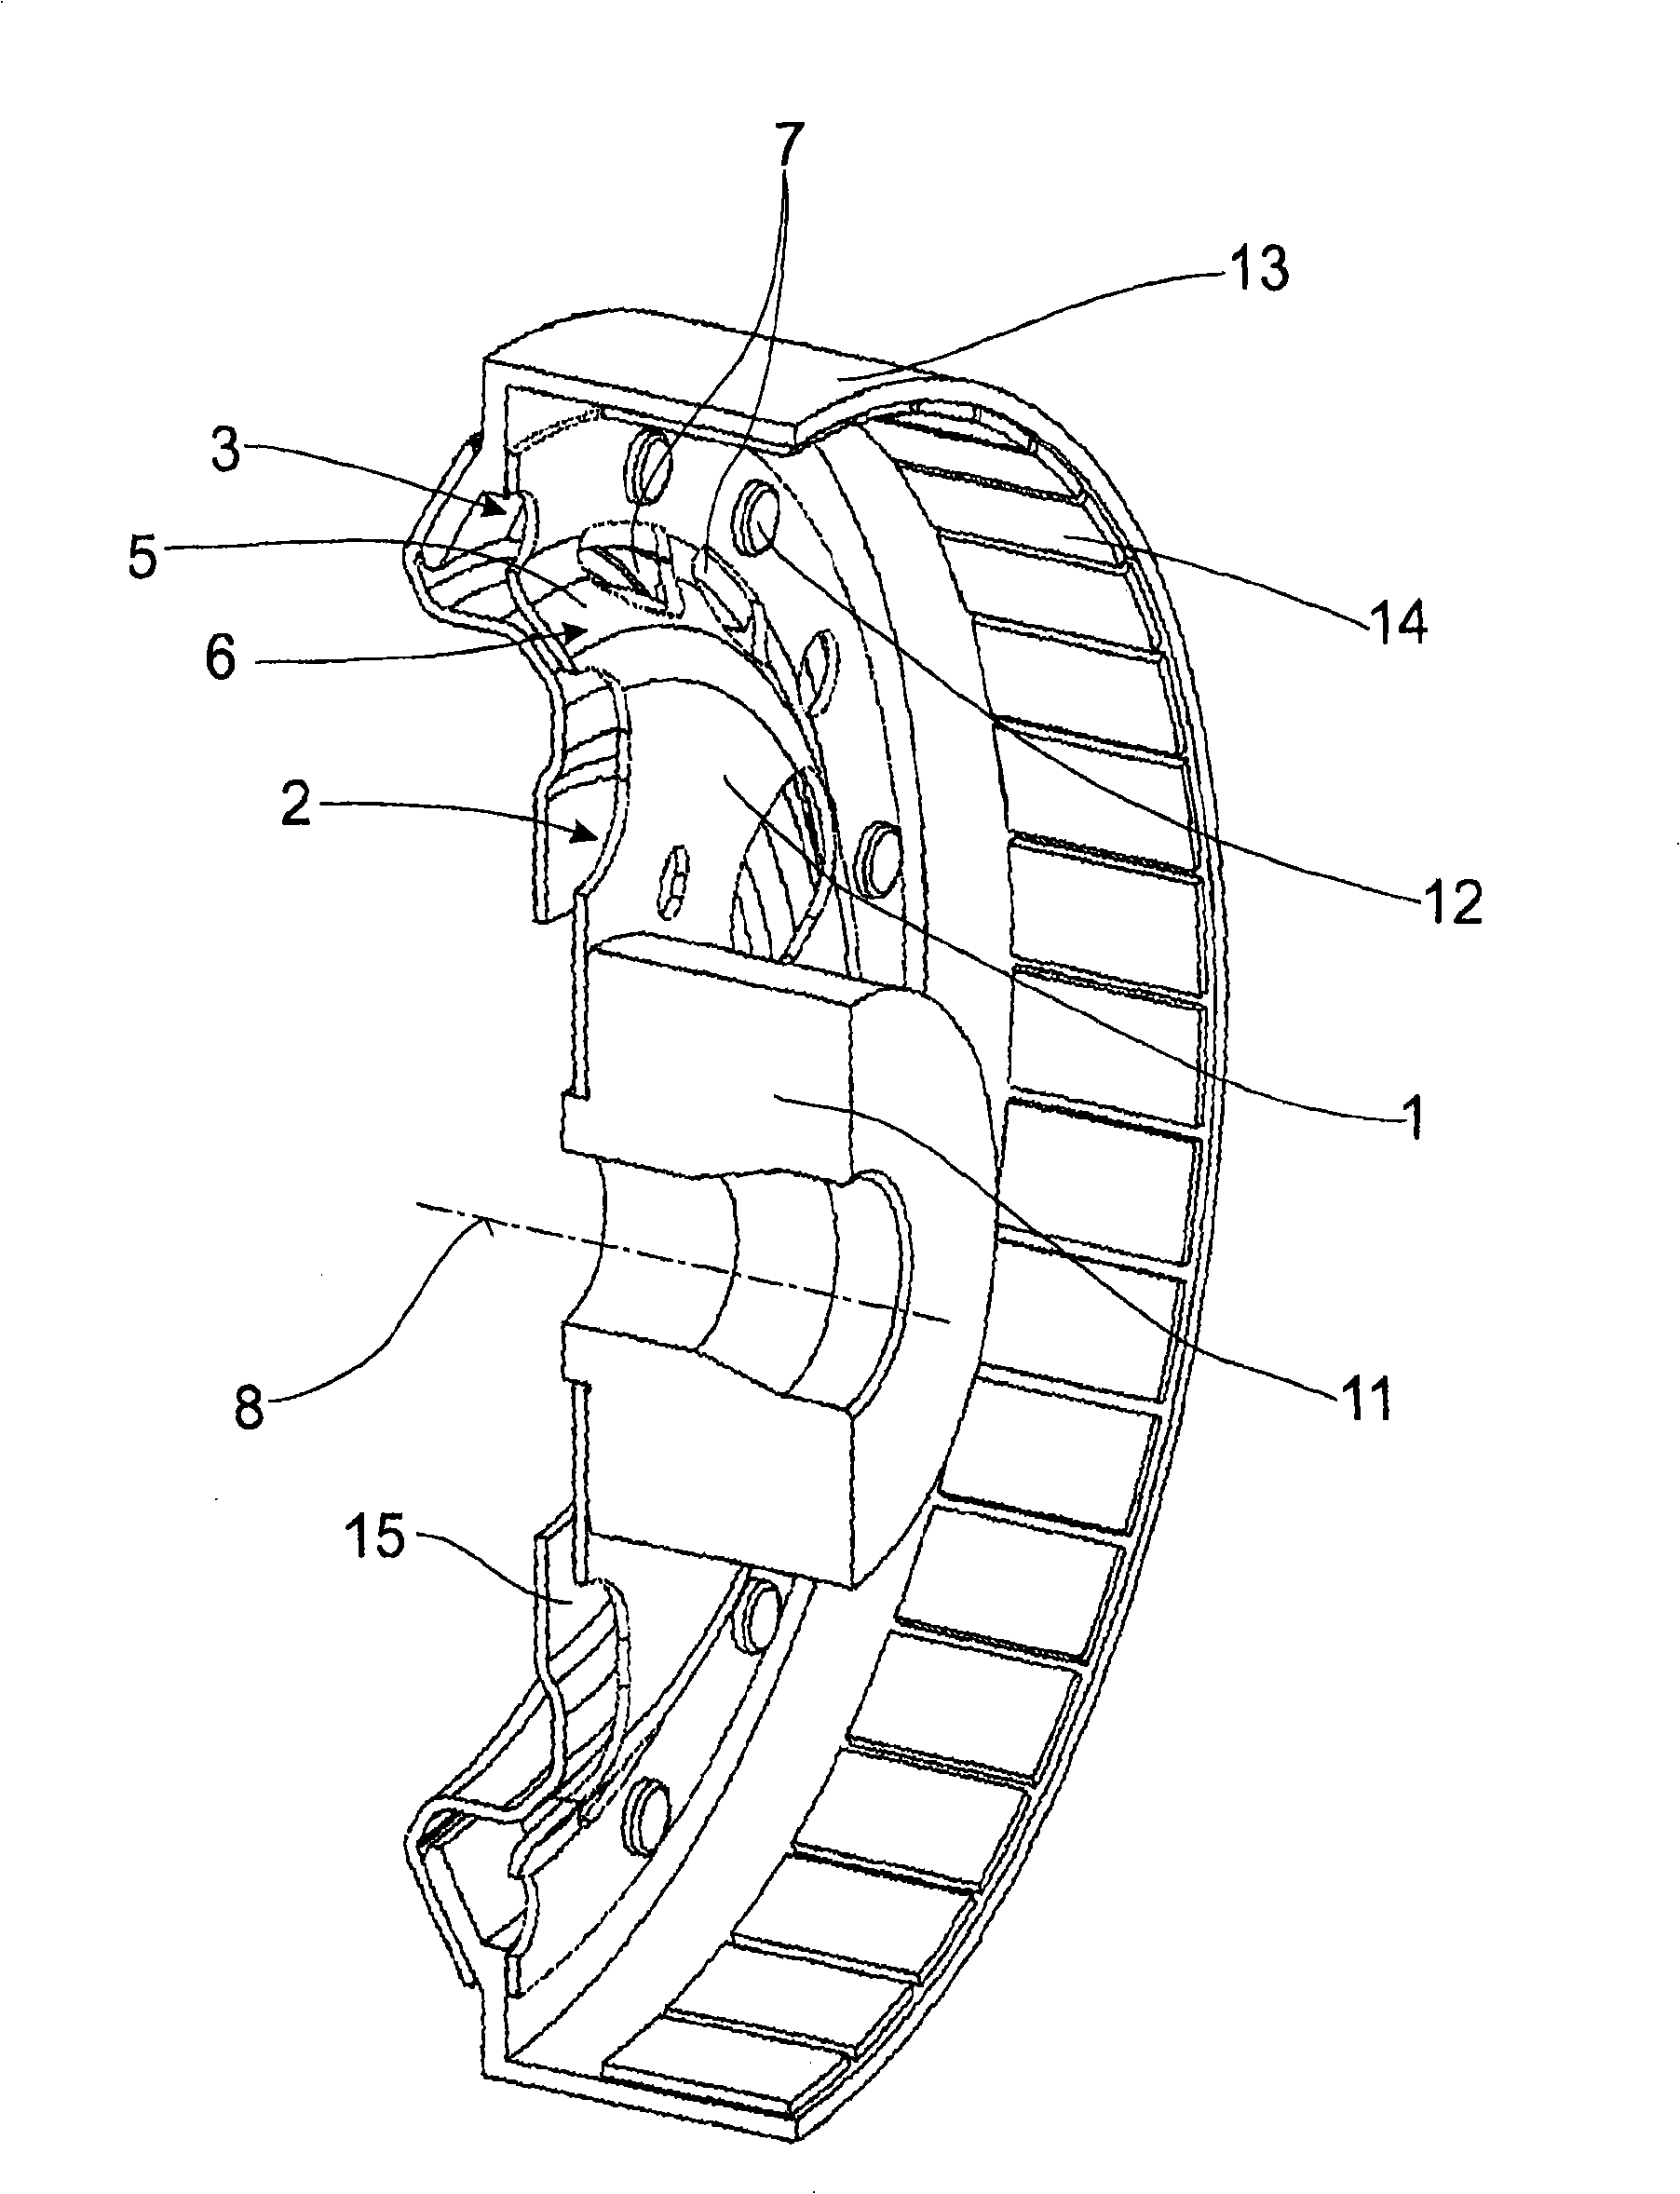 Disc for transferring a torque transmission in torque transmission transfer device of a motor vehicle